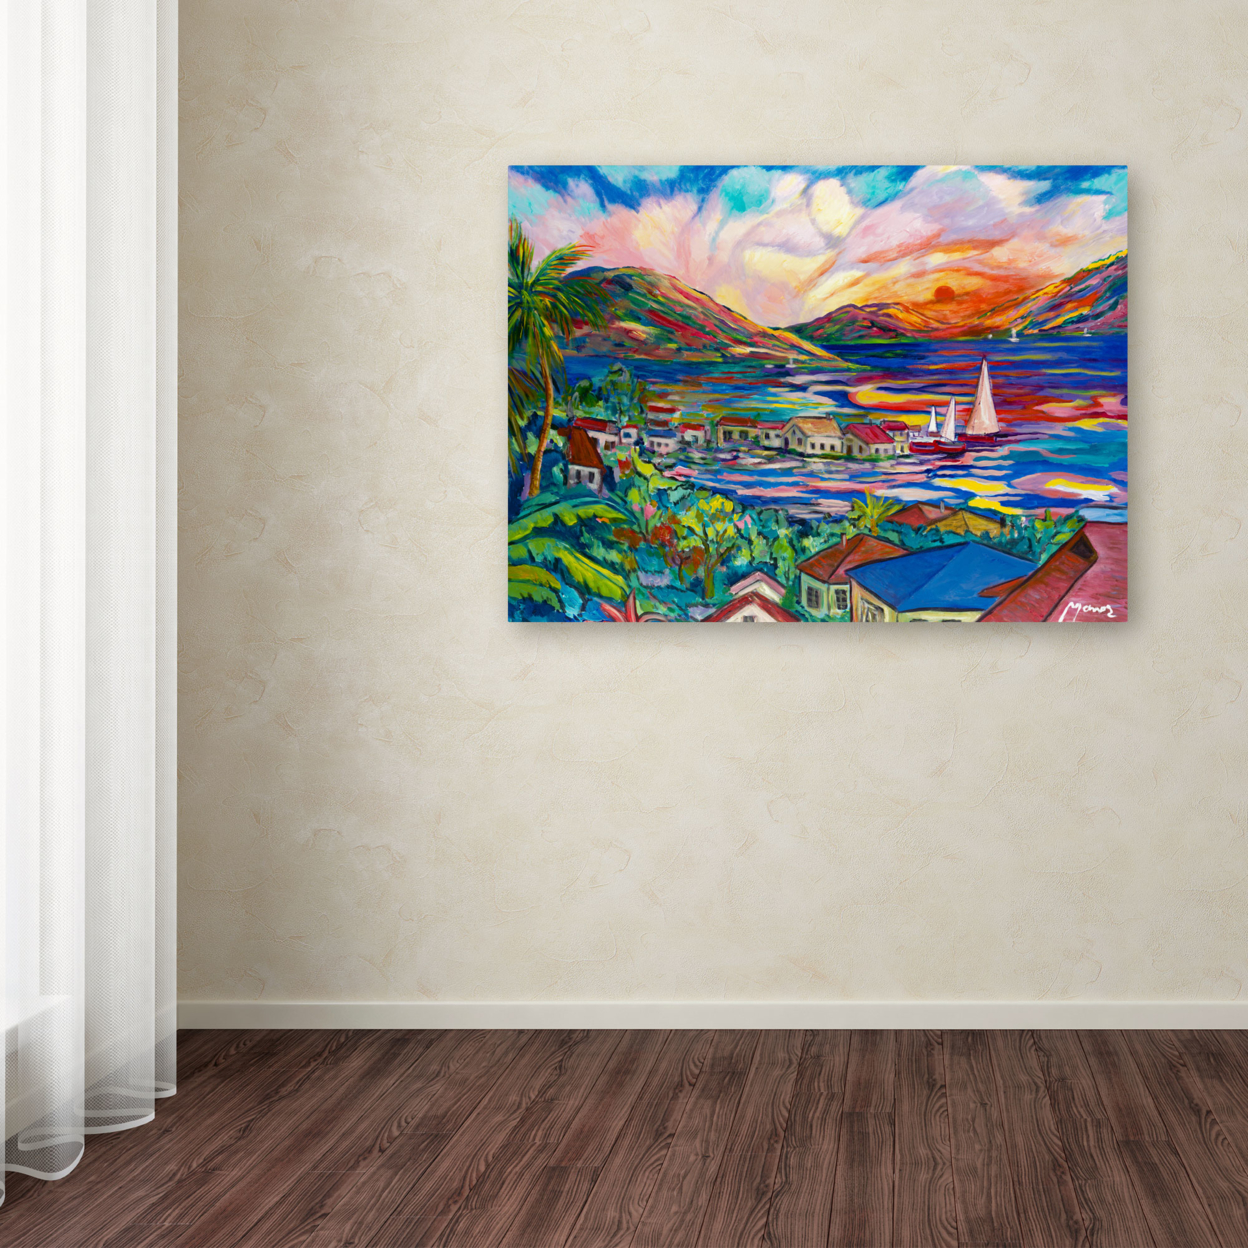 Manor Shadian 'Sunset' Canvas Wall Art 35 X 47 Inches